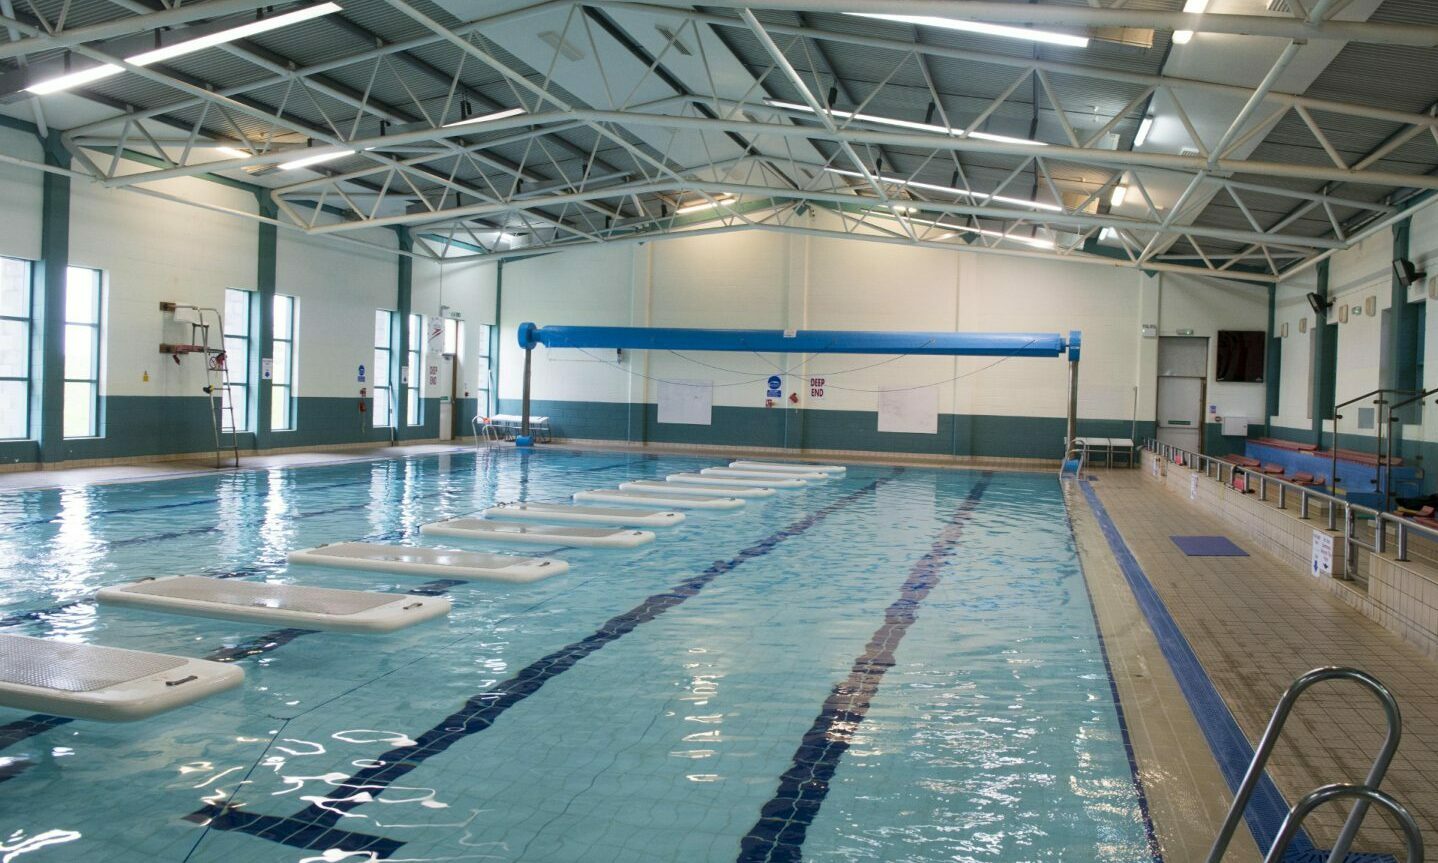 12 swimming pools to visit across the north and north-east